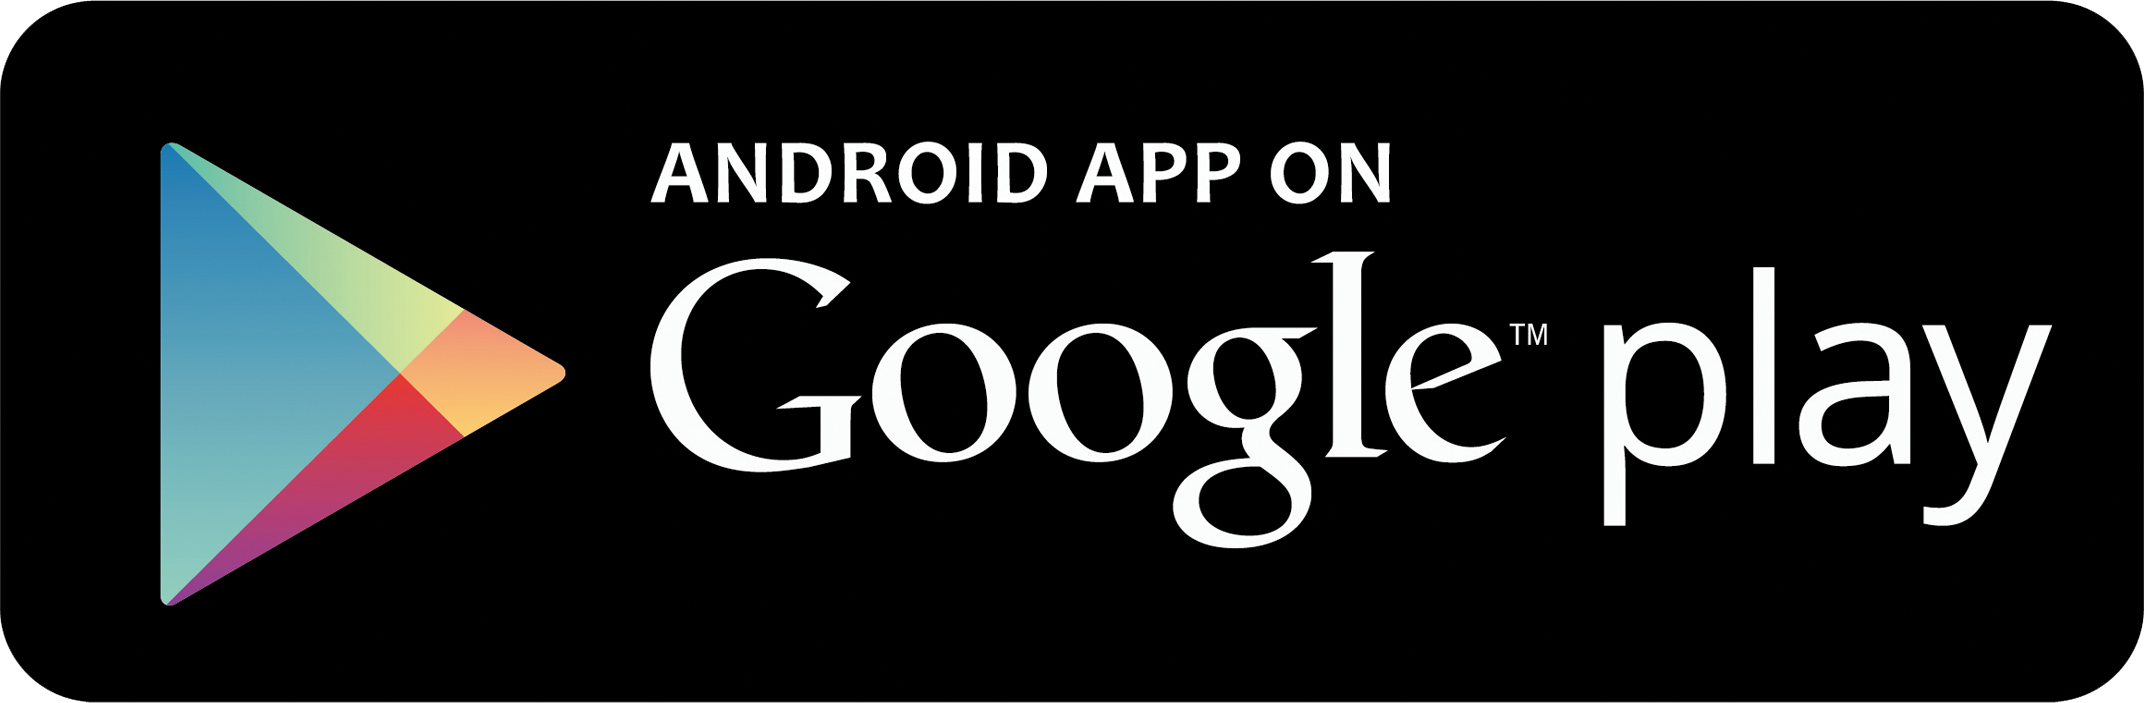  ANDROID APP ON Google play 2 